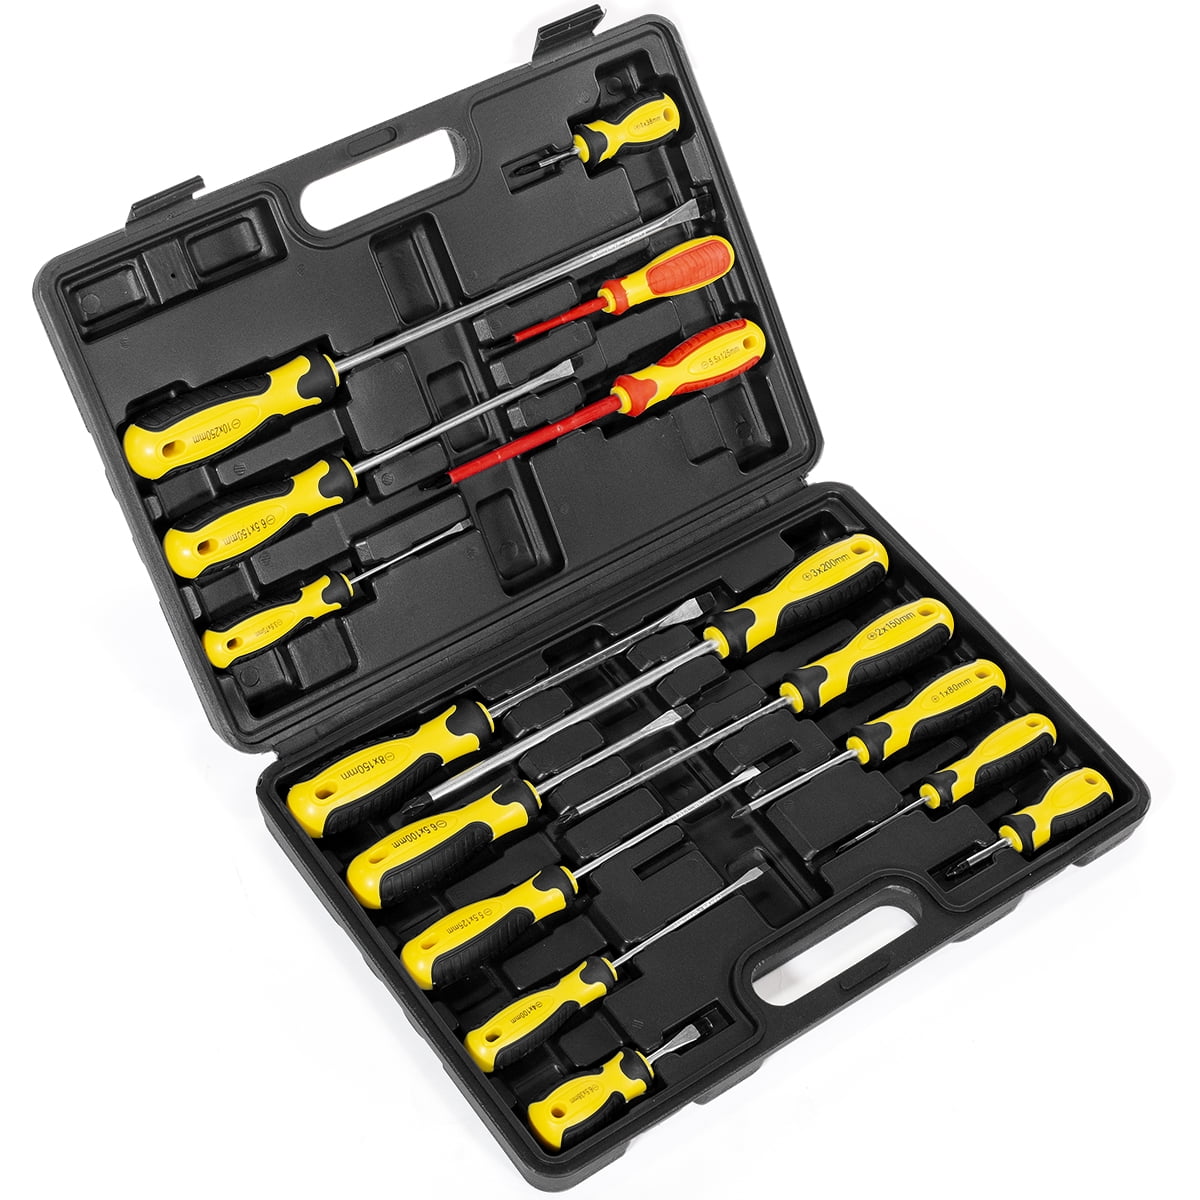 16-Pieces Insulated Mechanics Cr-v Screw Driver Slotted Philips Kit with Carrying Case - Walmart.com